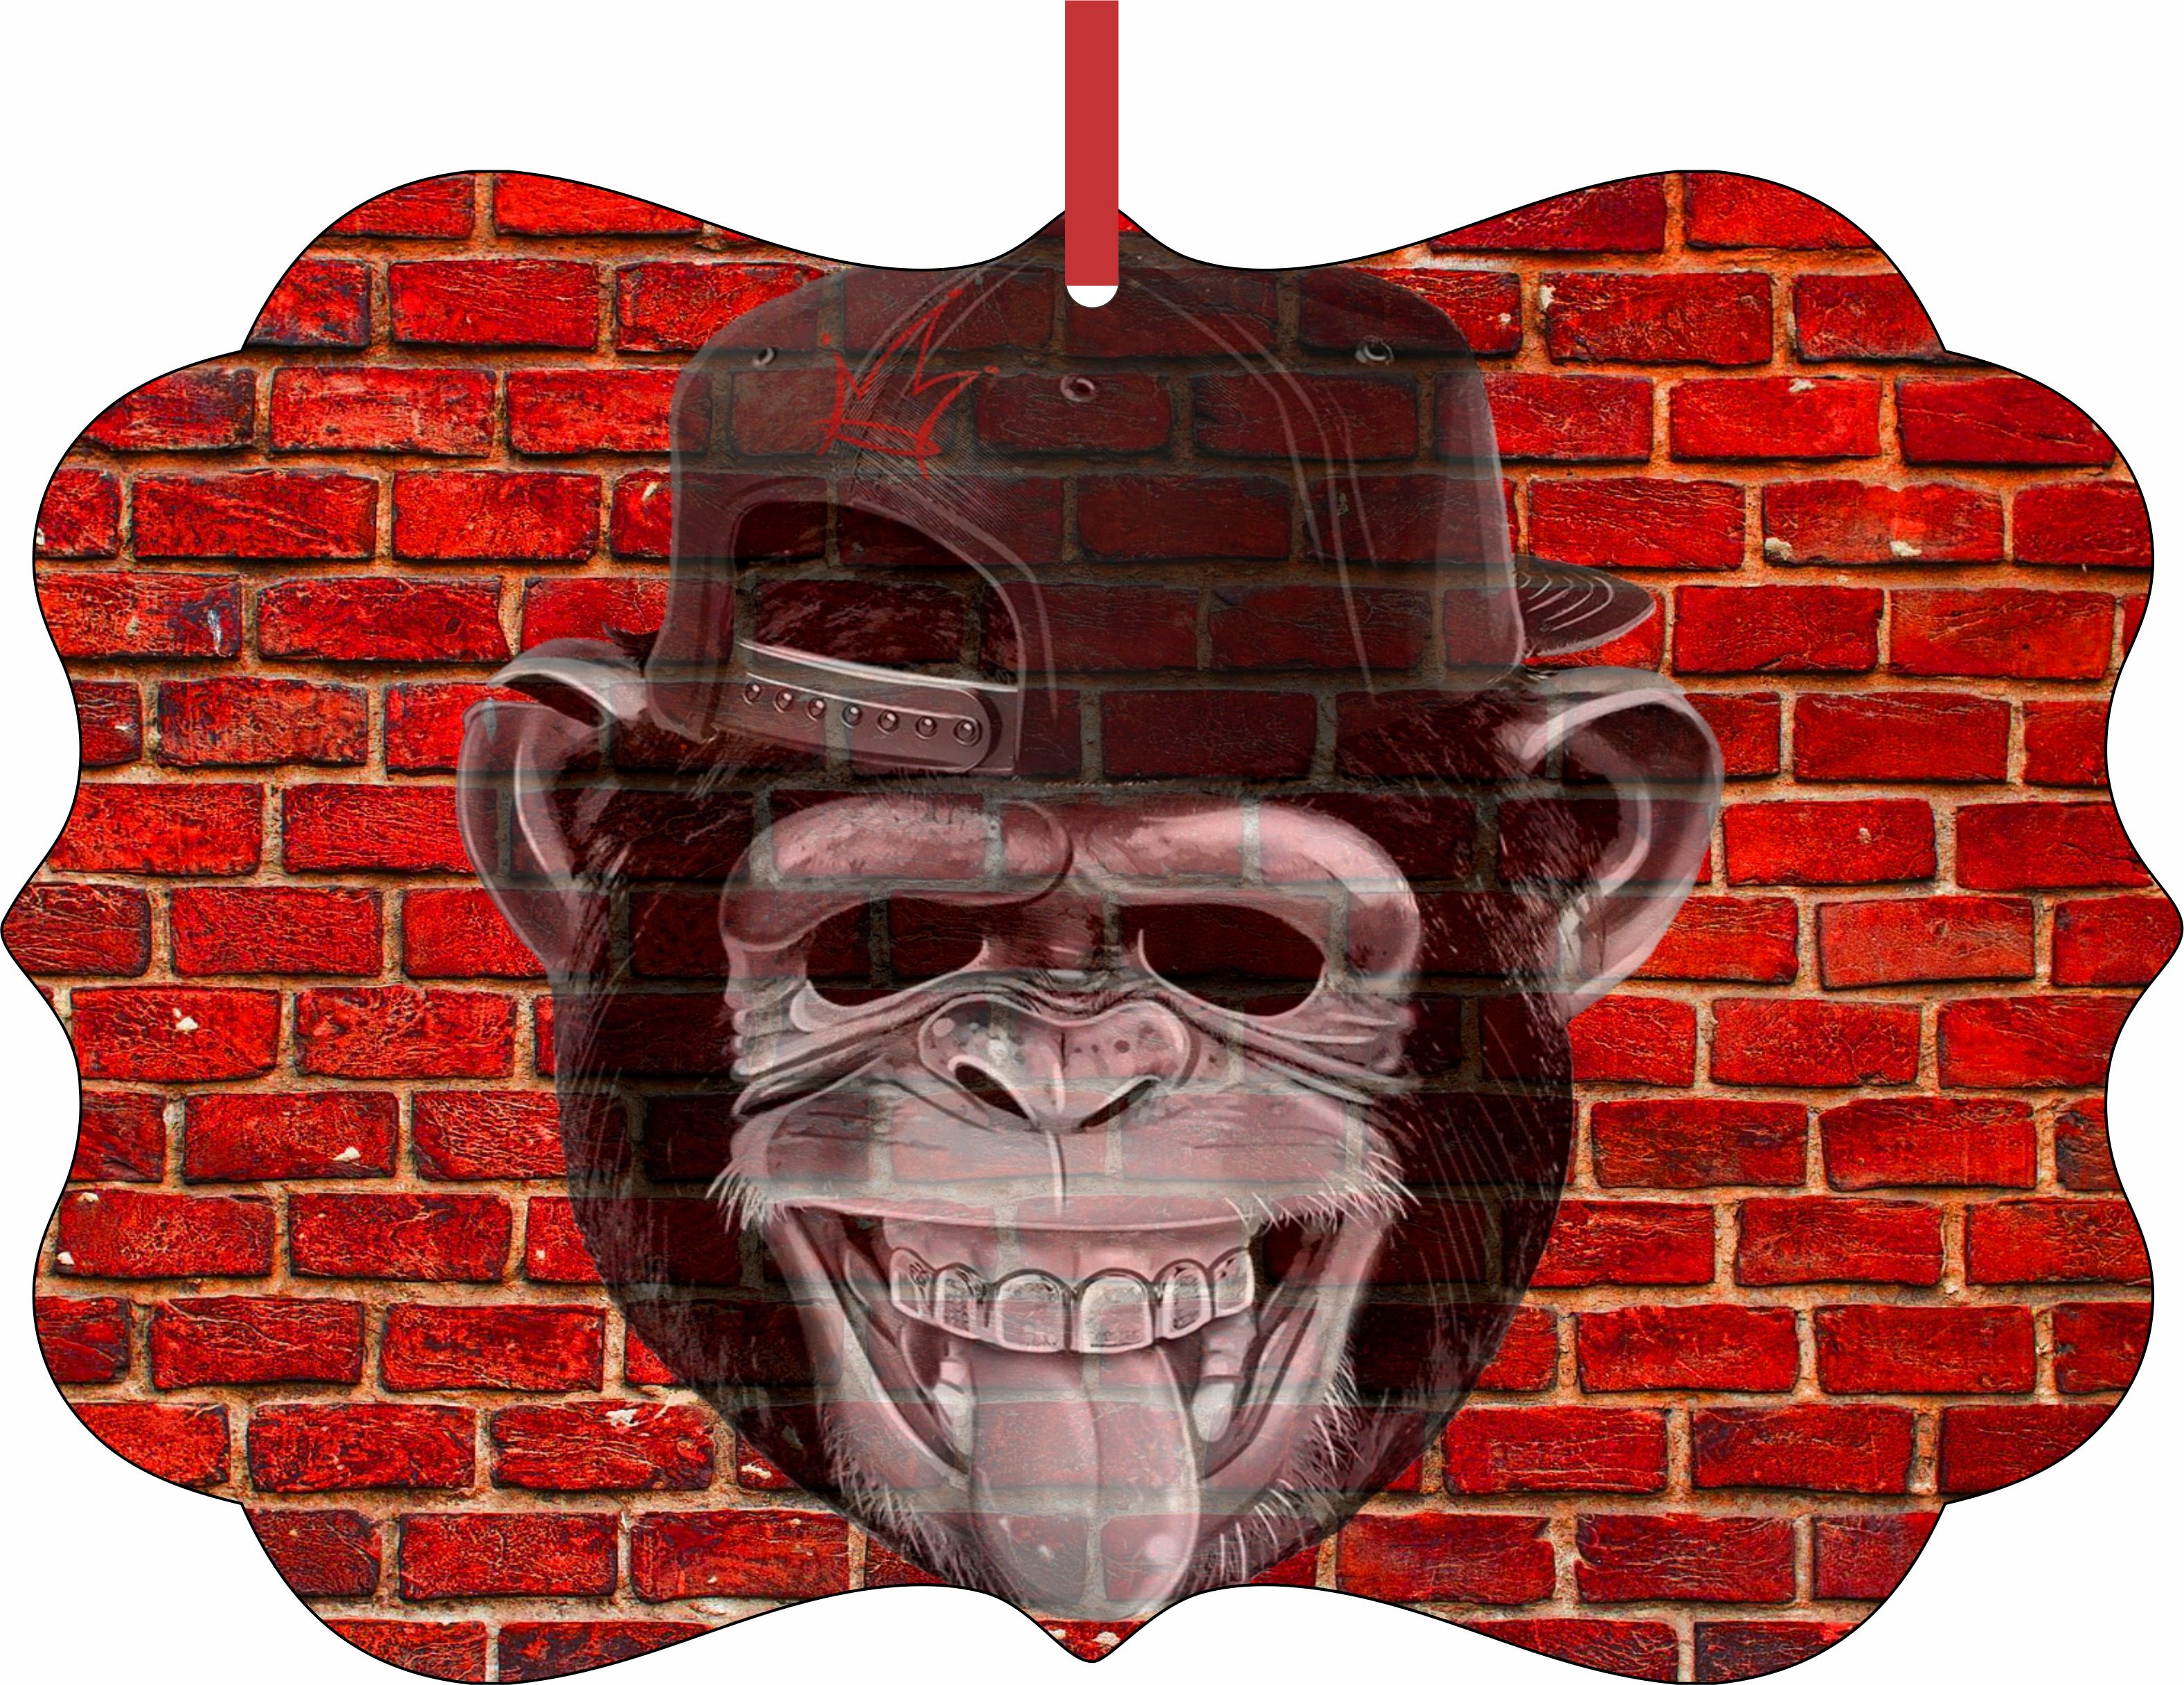 Punk Monkey Brick Wall Street Art Style Print - TM - Double-Sided Benelux Shaped High Gloss Hanging Holiday Ornament - image 1 of 1